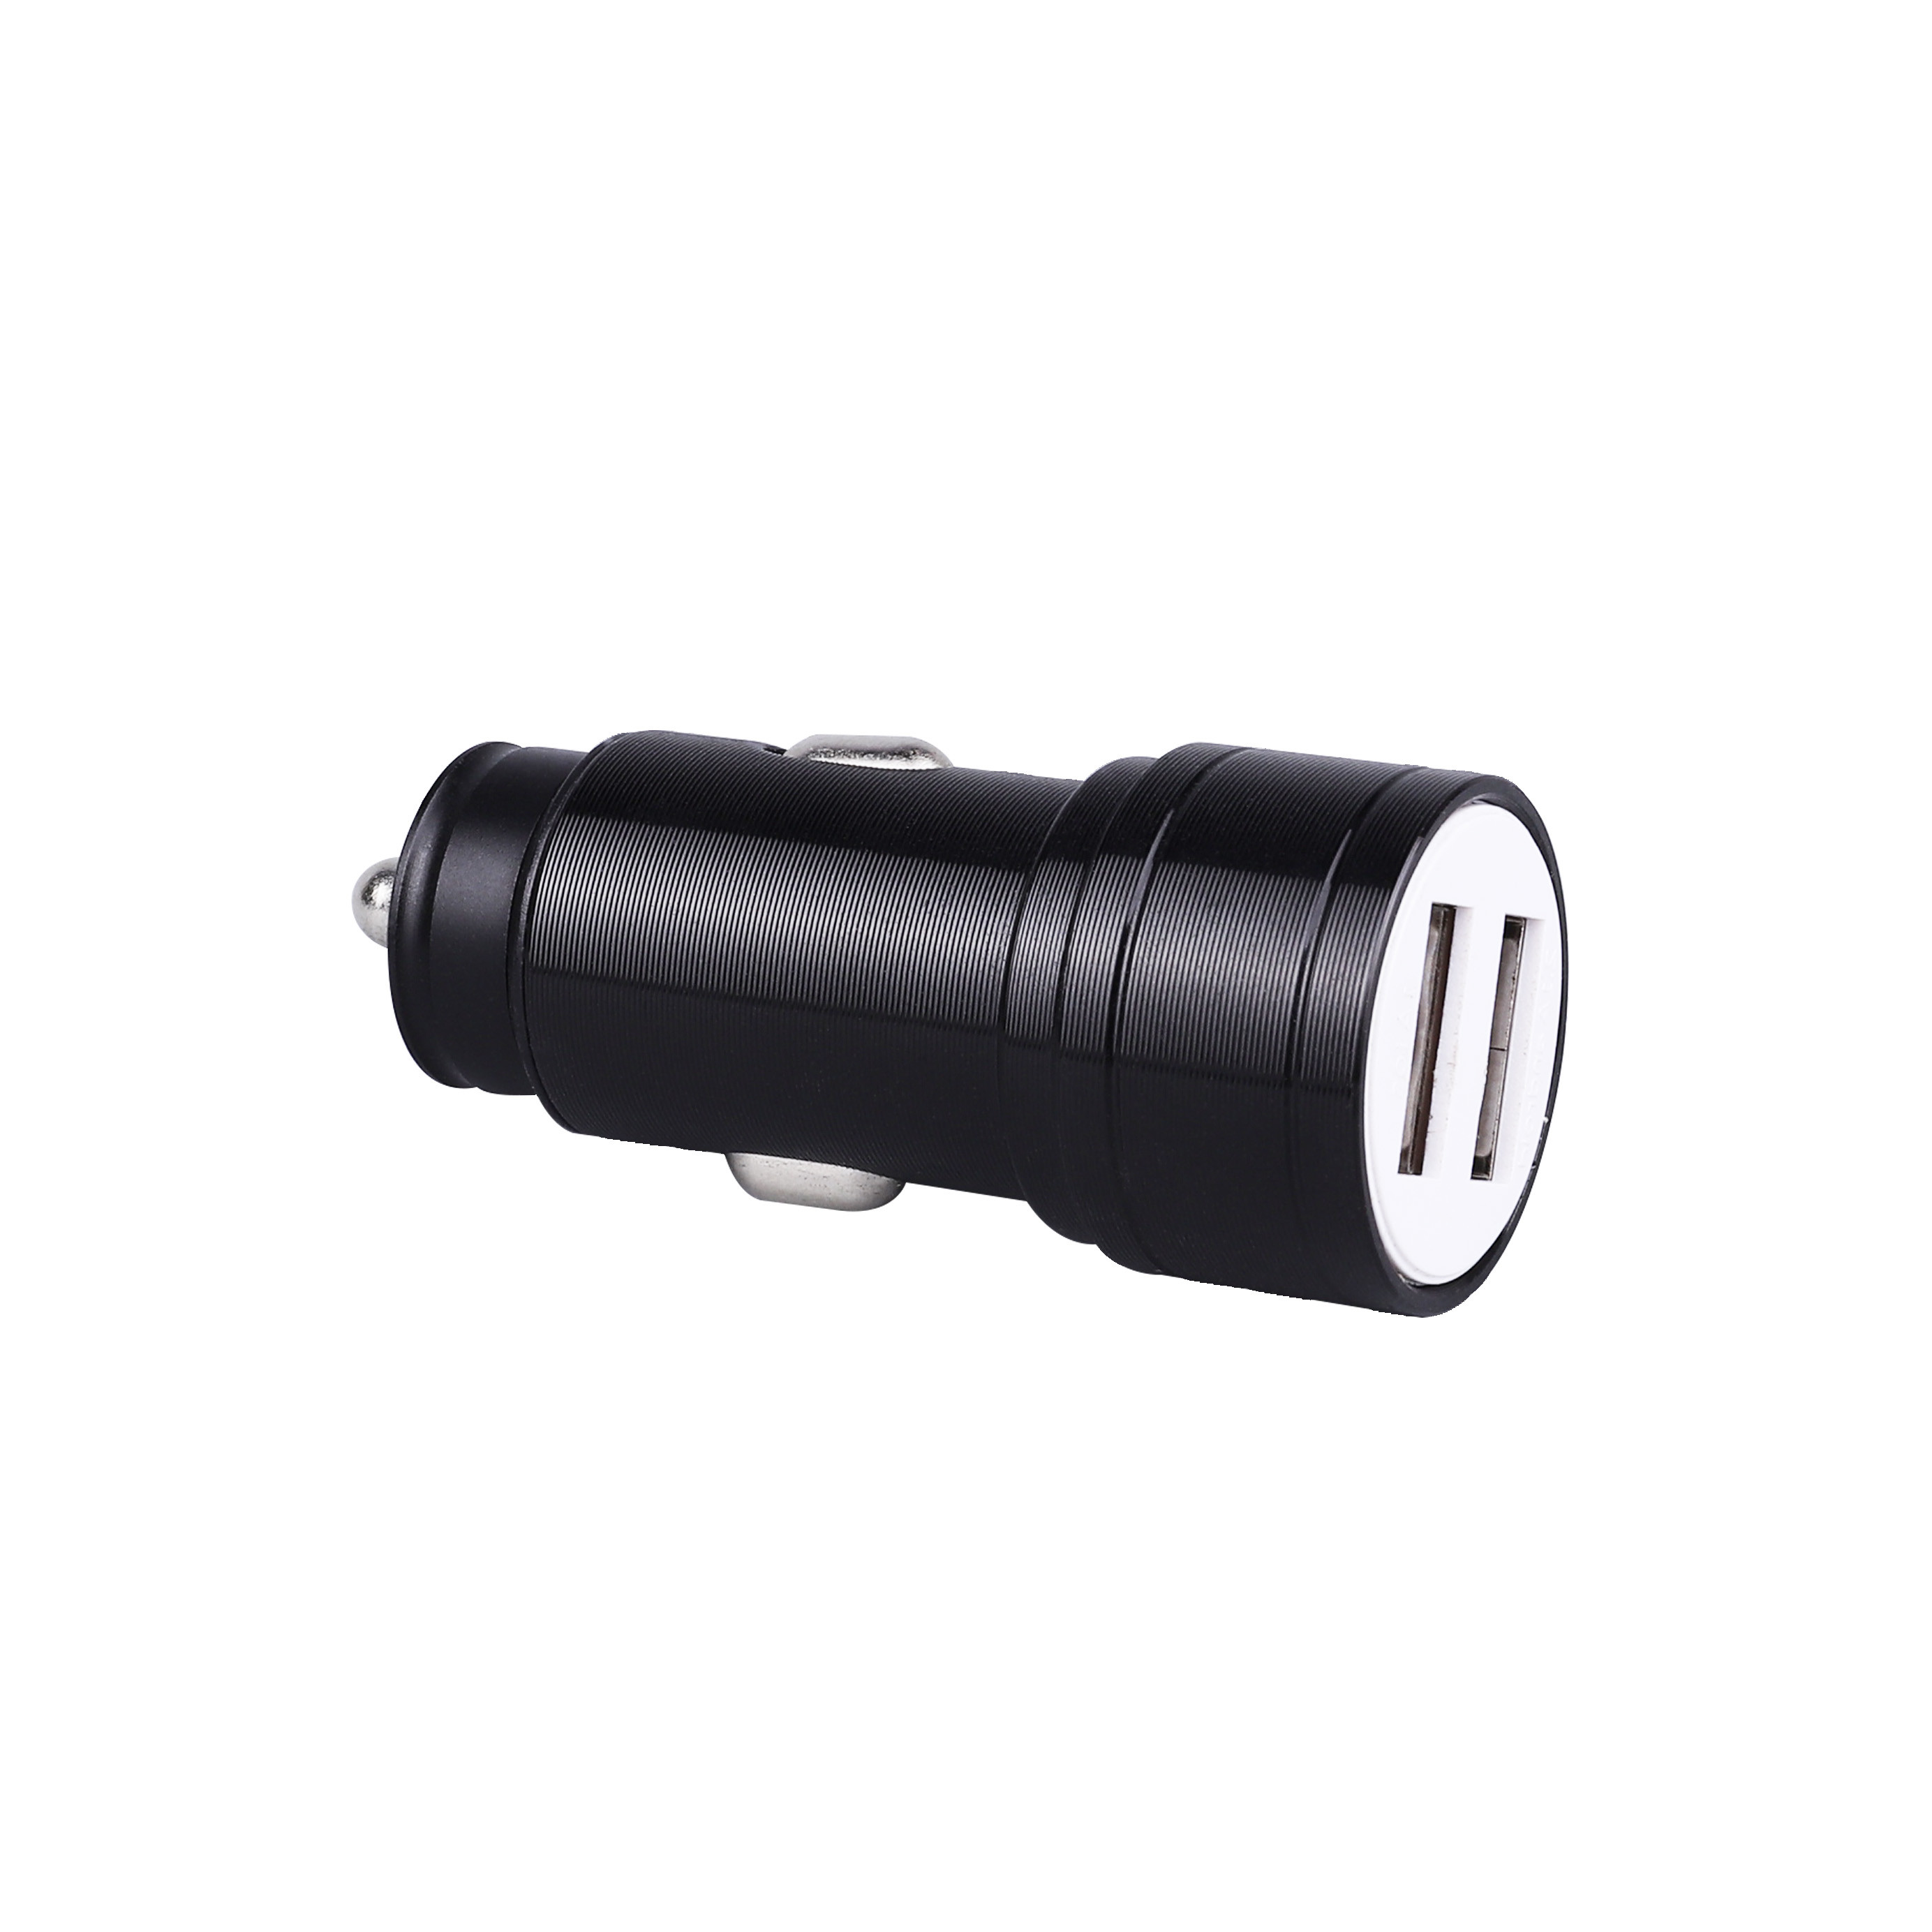 China Quick QC3.0 36W Dual USB Car Charger Suits For Smartphones,Tablets,GPS Units,IPods,MP3 Players for sale